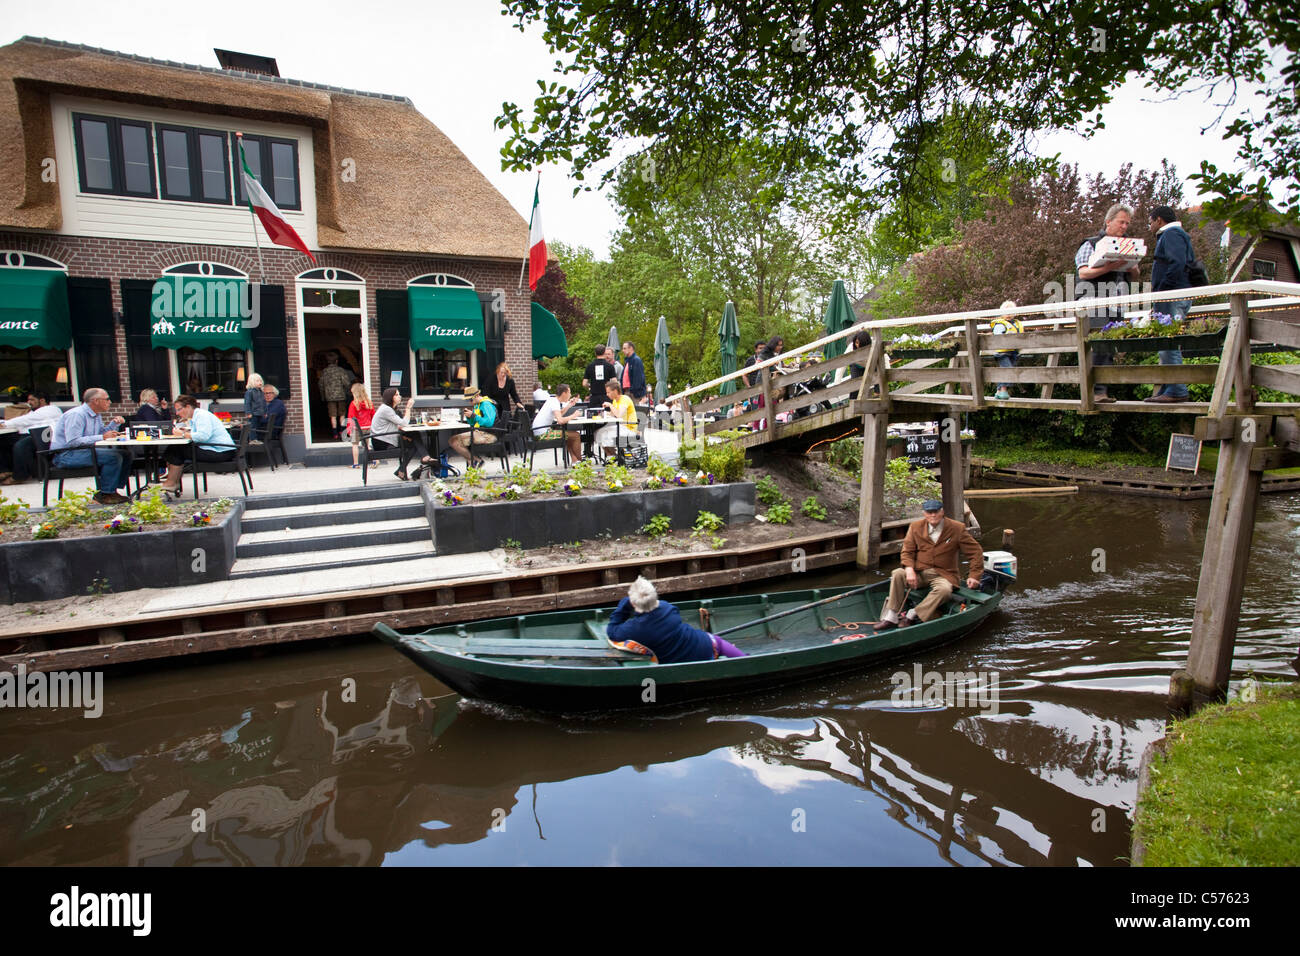 The Netherlands, Giethoorn, Village with almost only waterways. Italian restaurant and outdoor cafe. Boat pasing. Stock Photo